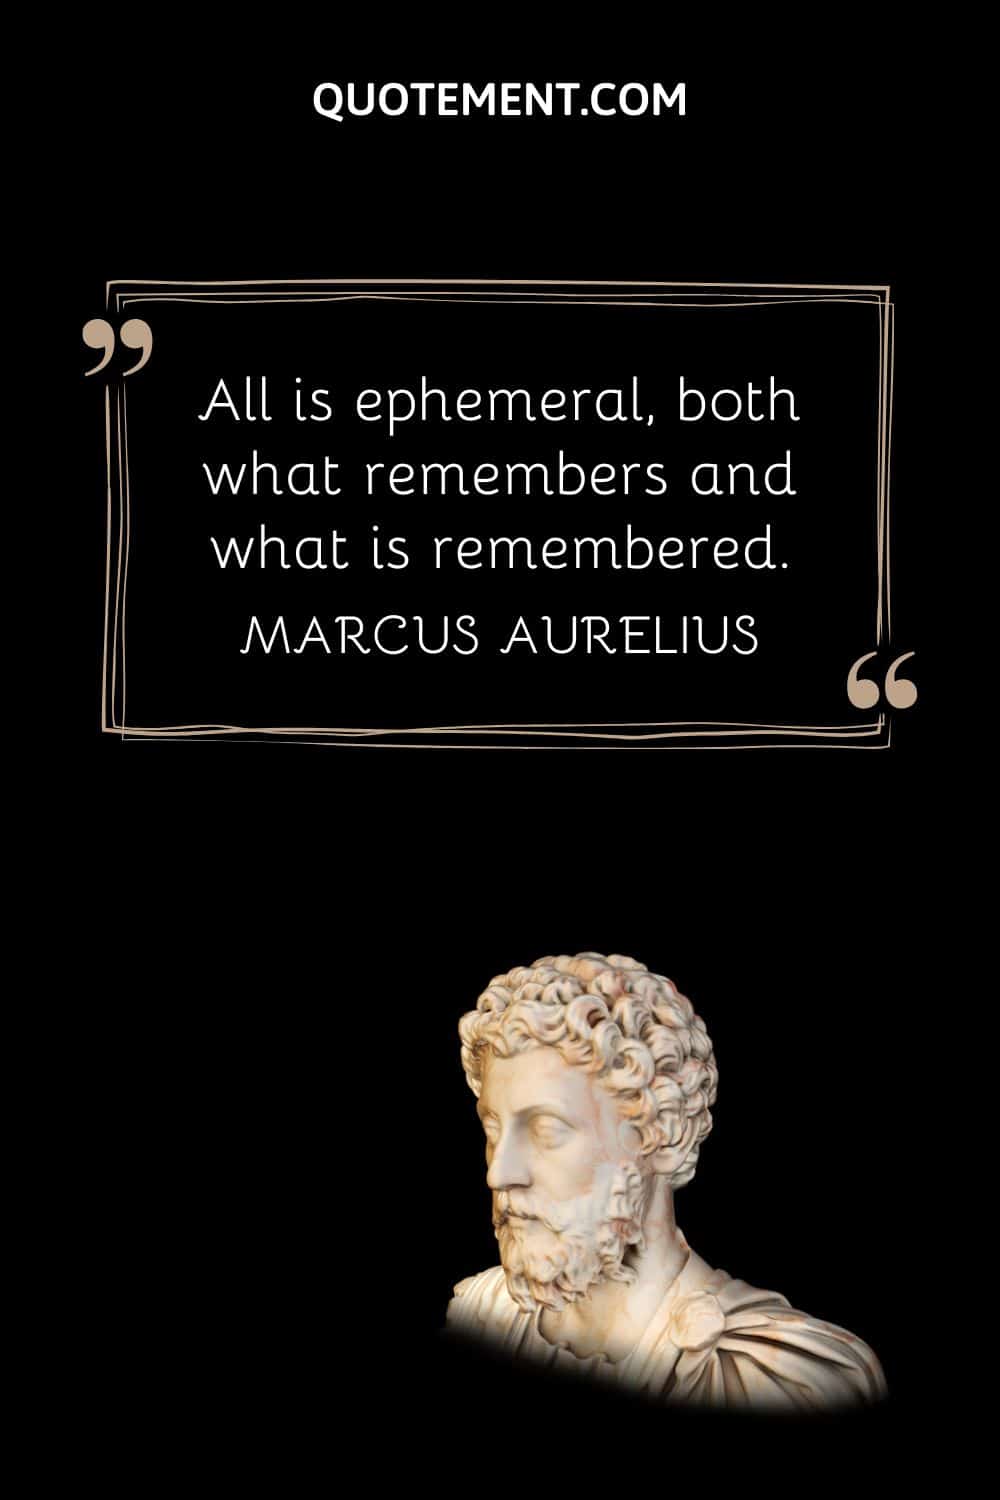 “All is ephemeral, both what remembers and what is remembered.” ― Marcus Aurelius